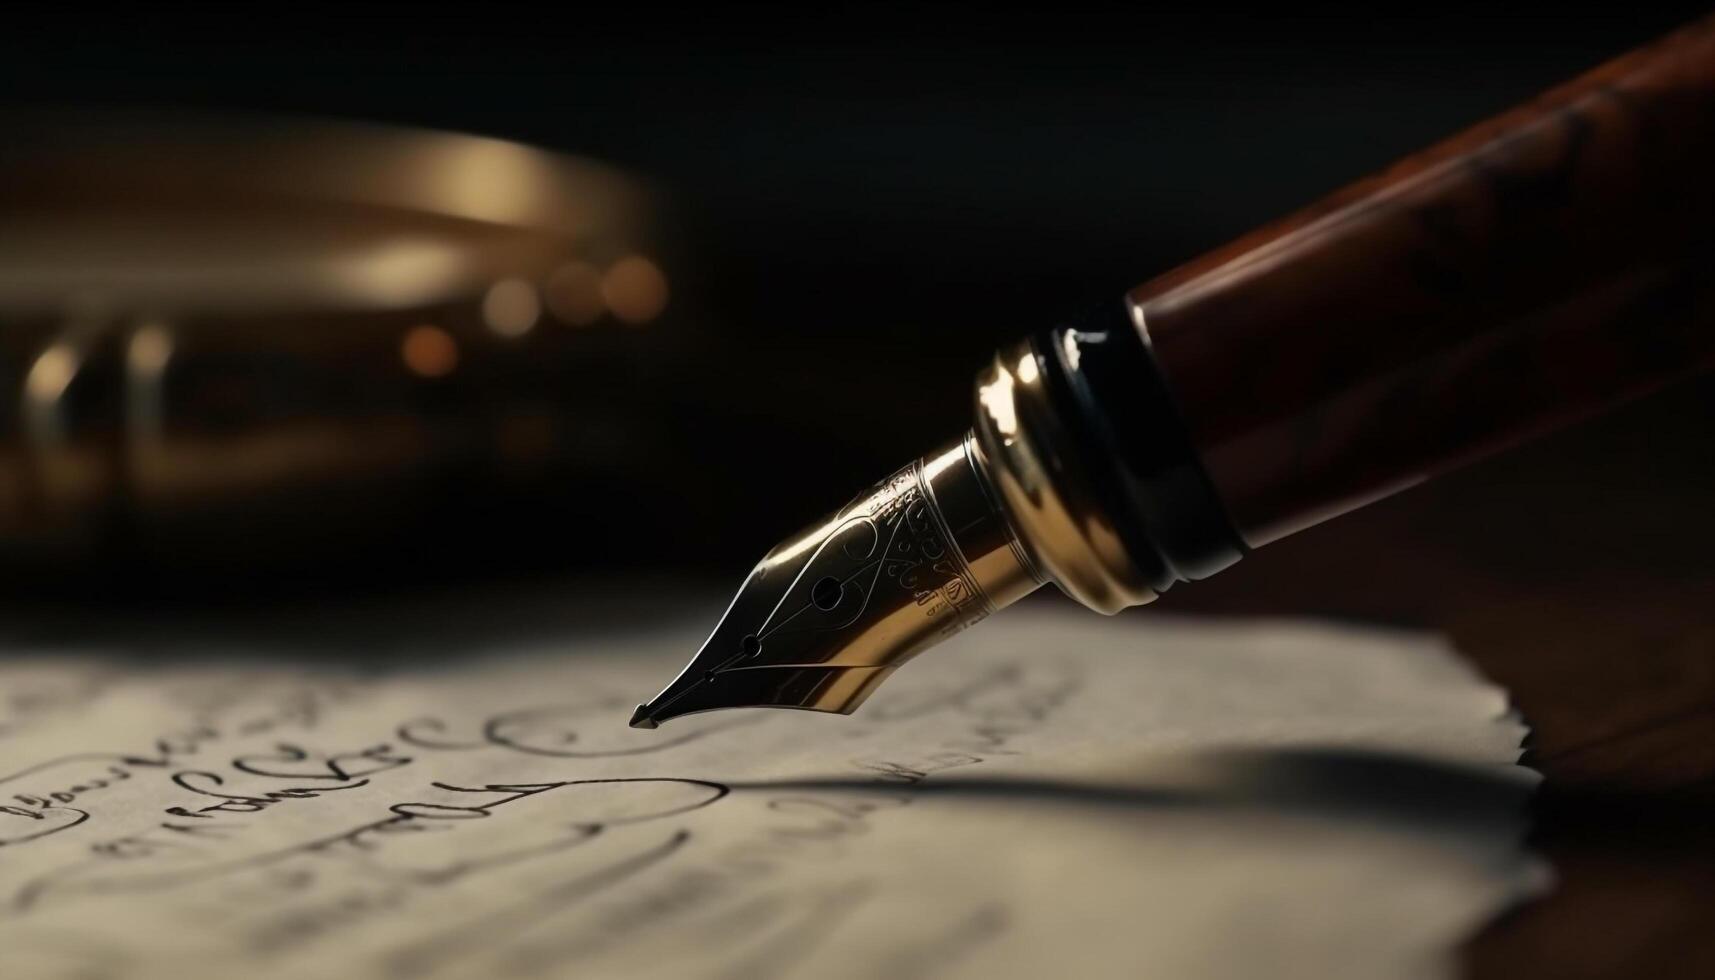 Antique quill pen writes elegant calligraphy on parchment document generated by AI photo